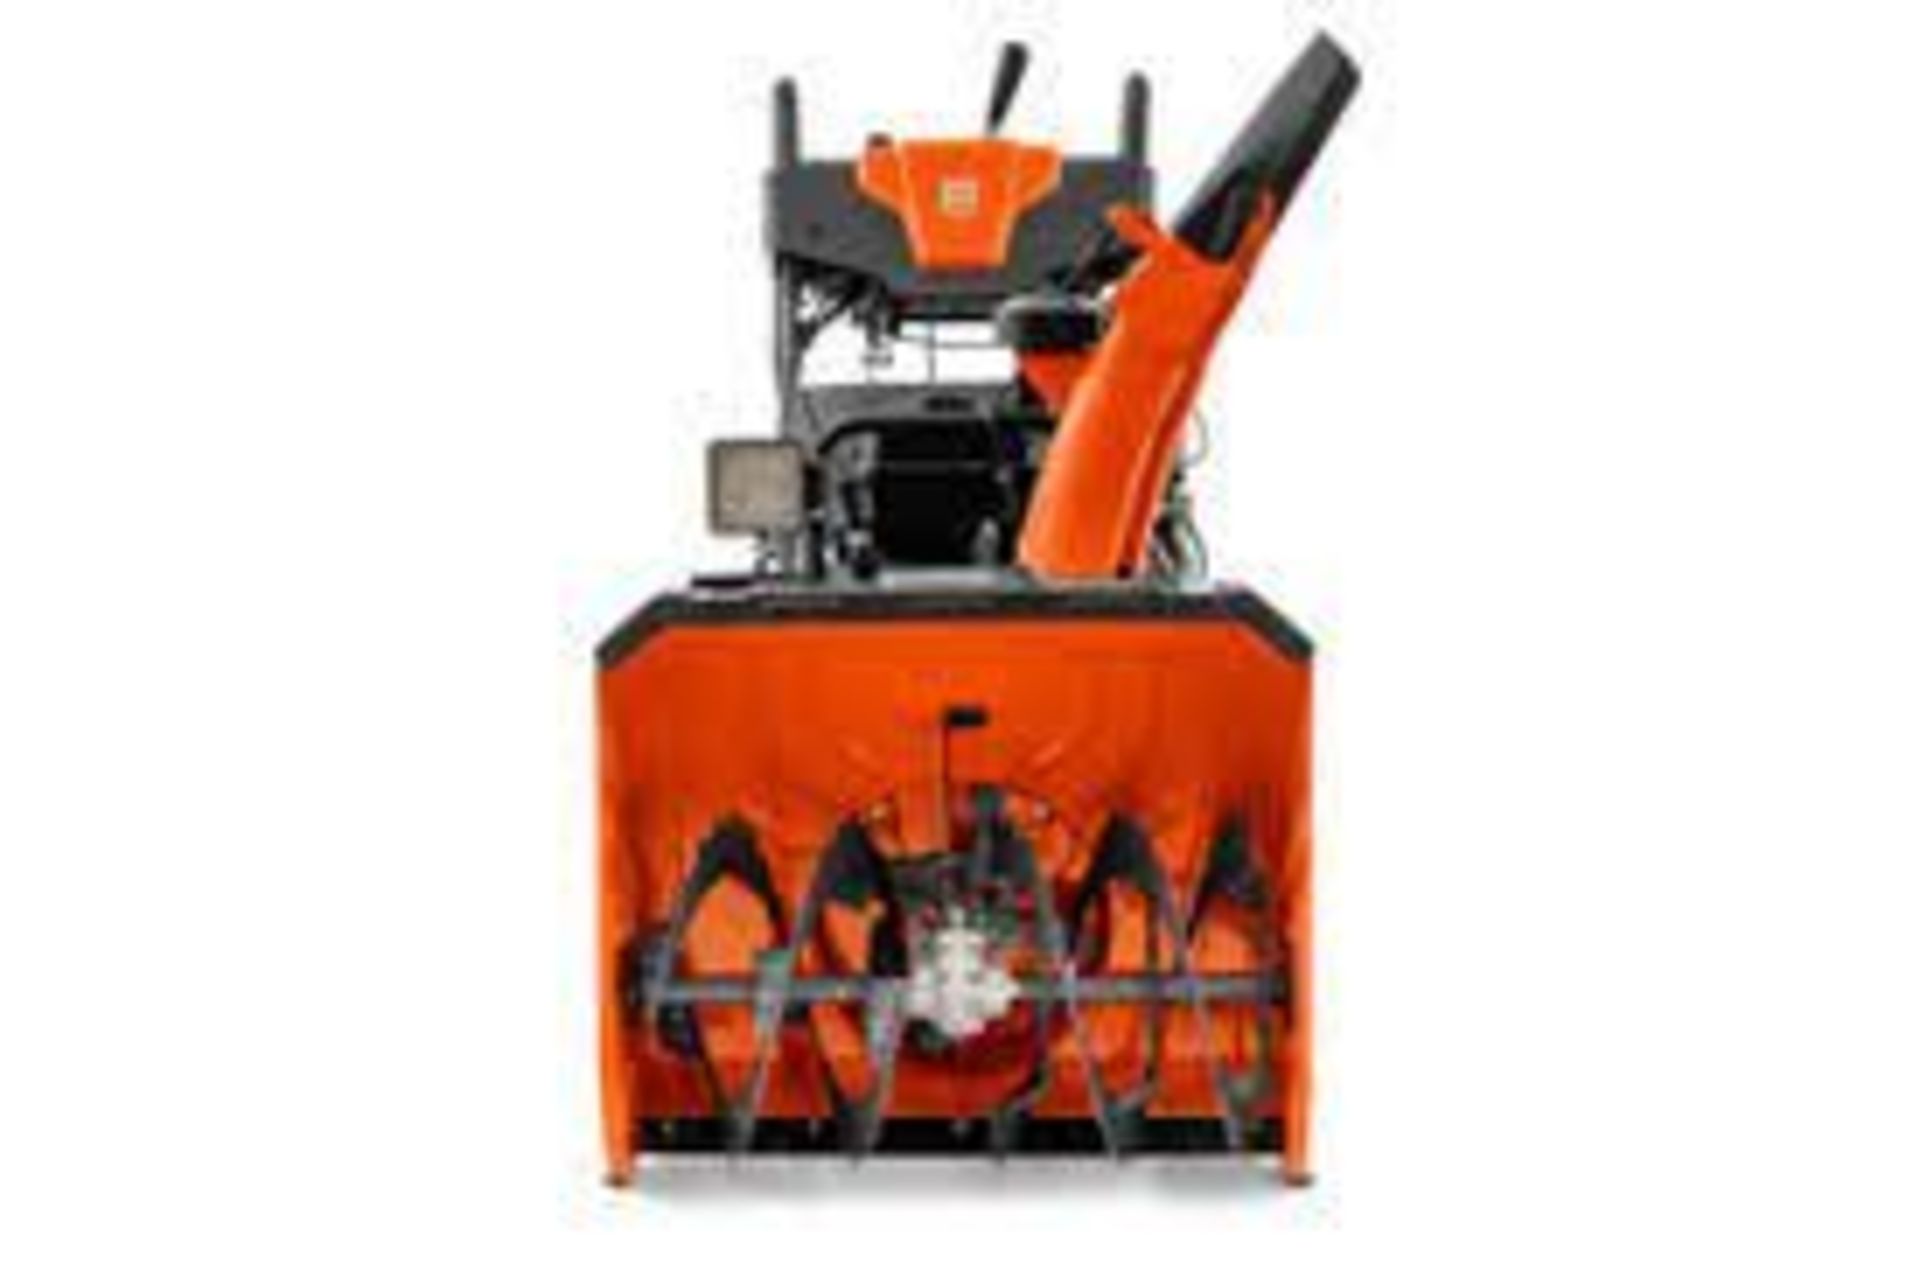 Husqvarna ST 427 Self Propelled Snow Blower - Approx MSRP $2399 - Image 3 of 5